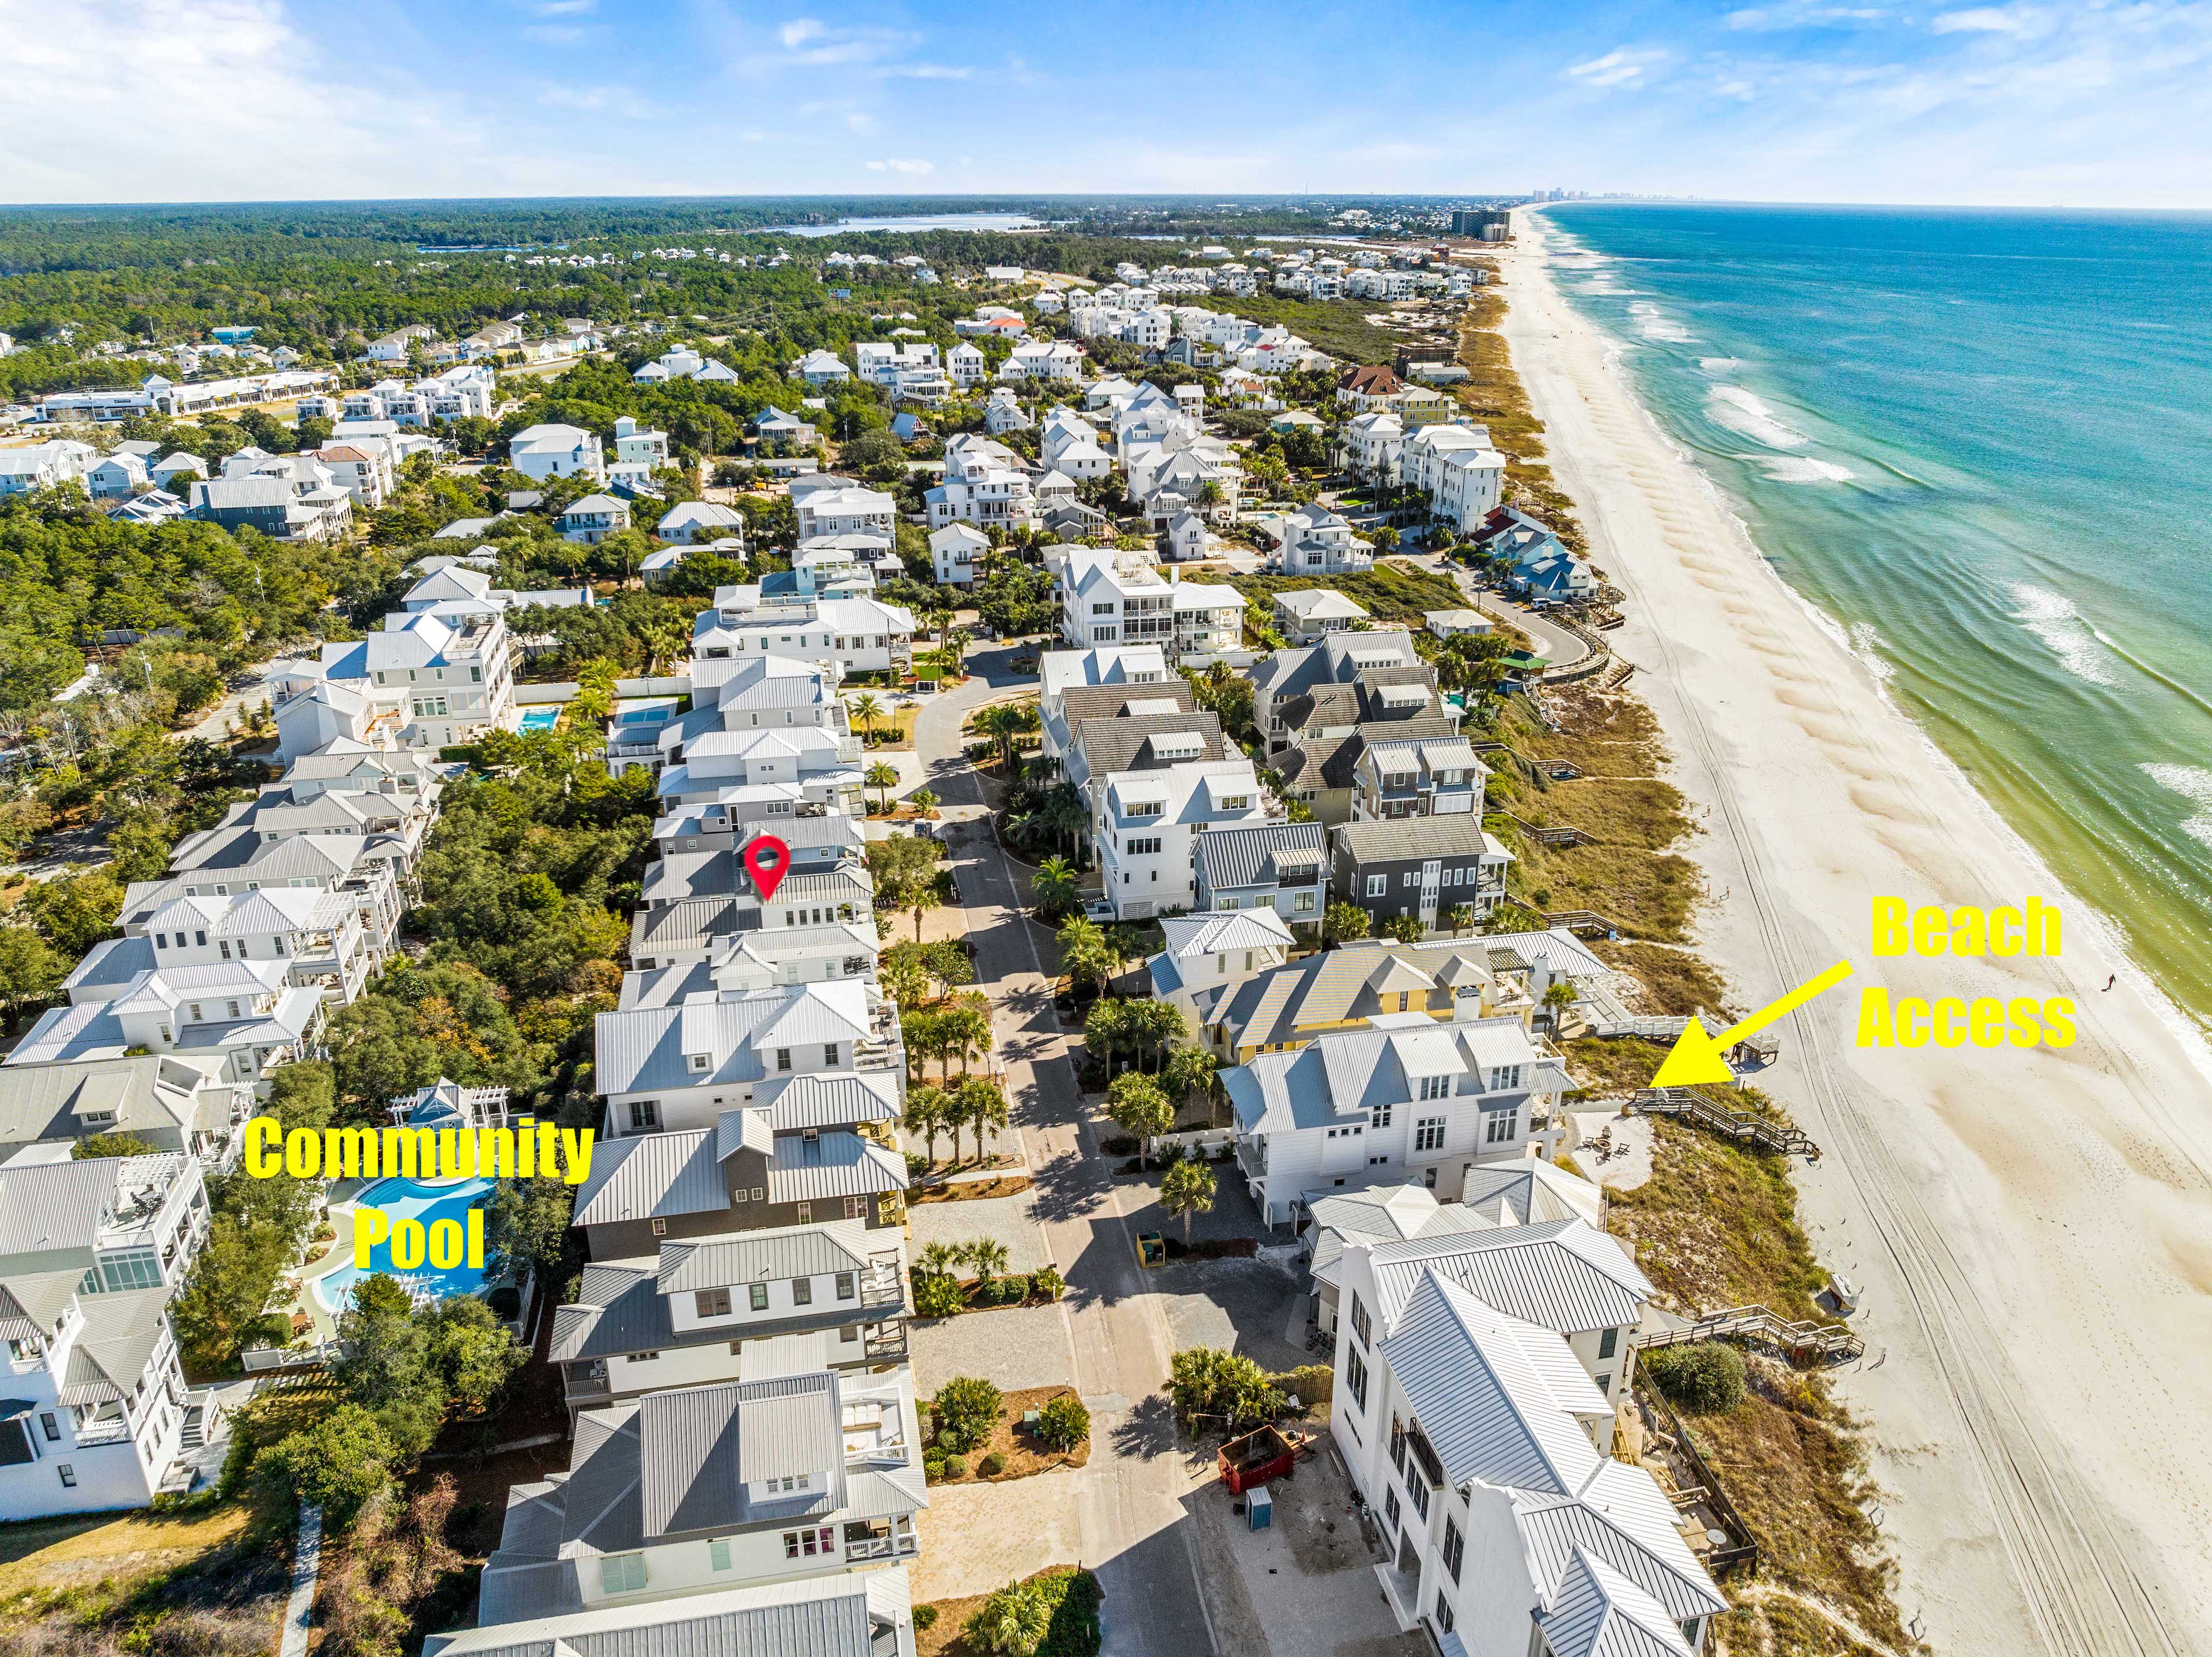 Across from the deeded beach entrance, only for neighborhood